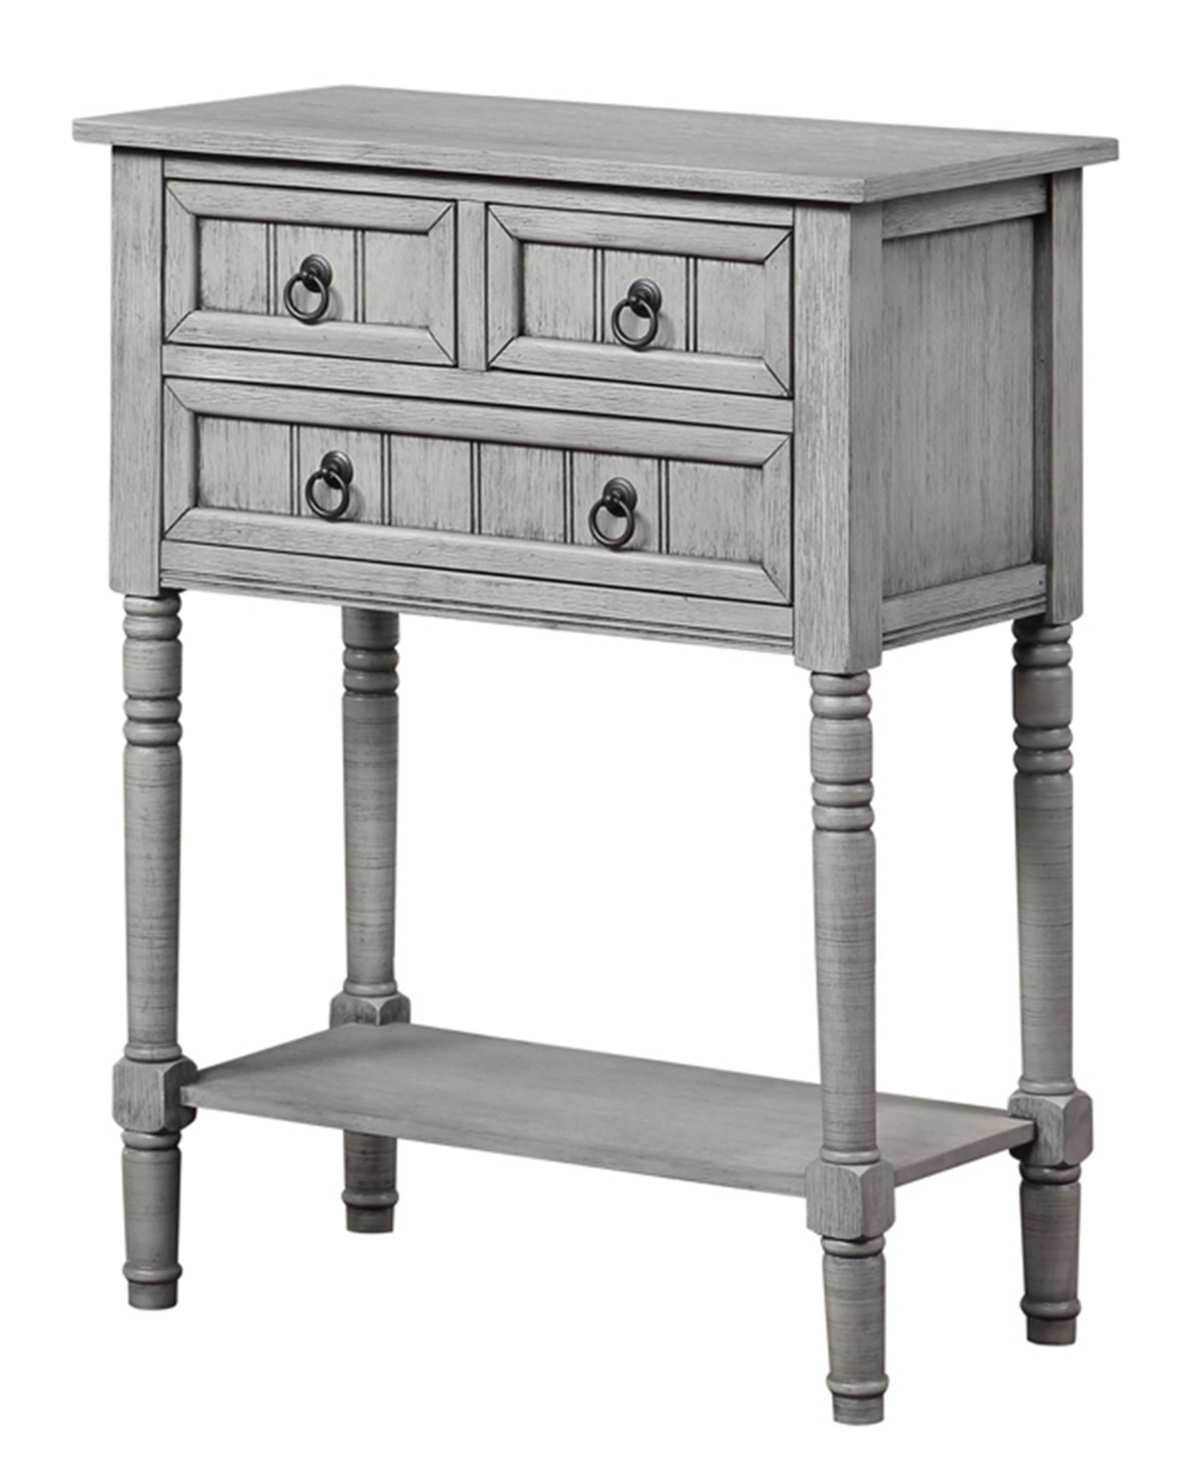 Convenience Concepts 23.75" Mdf Kendra 3 Drawer Hall Table With Shelf In Wirebrush Light Gray